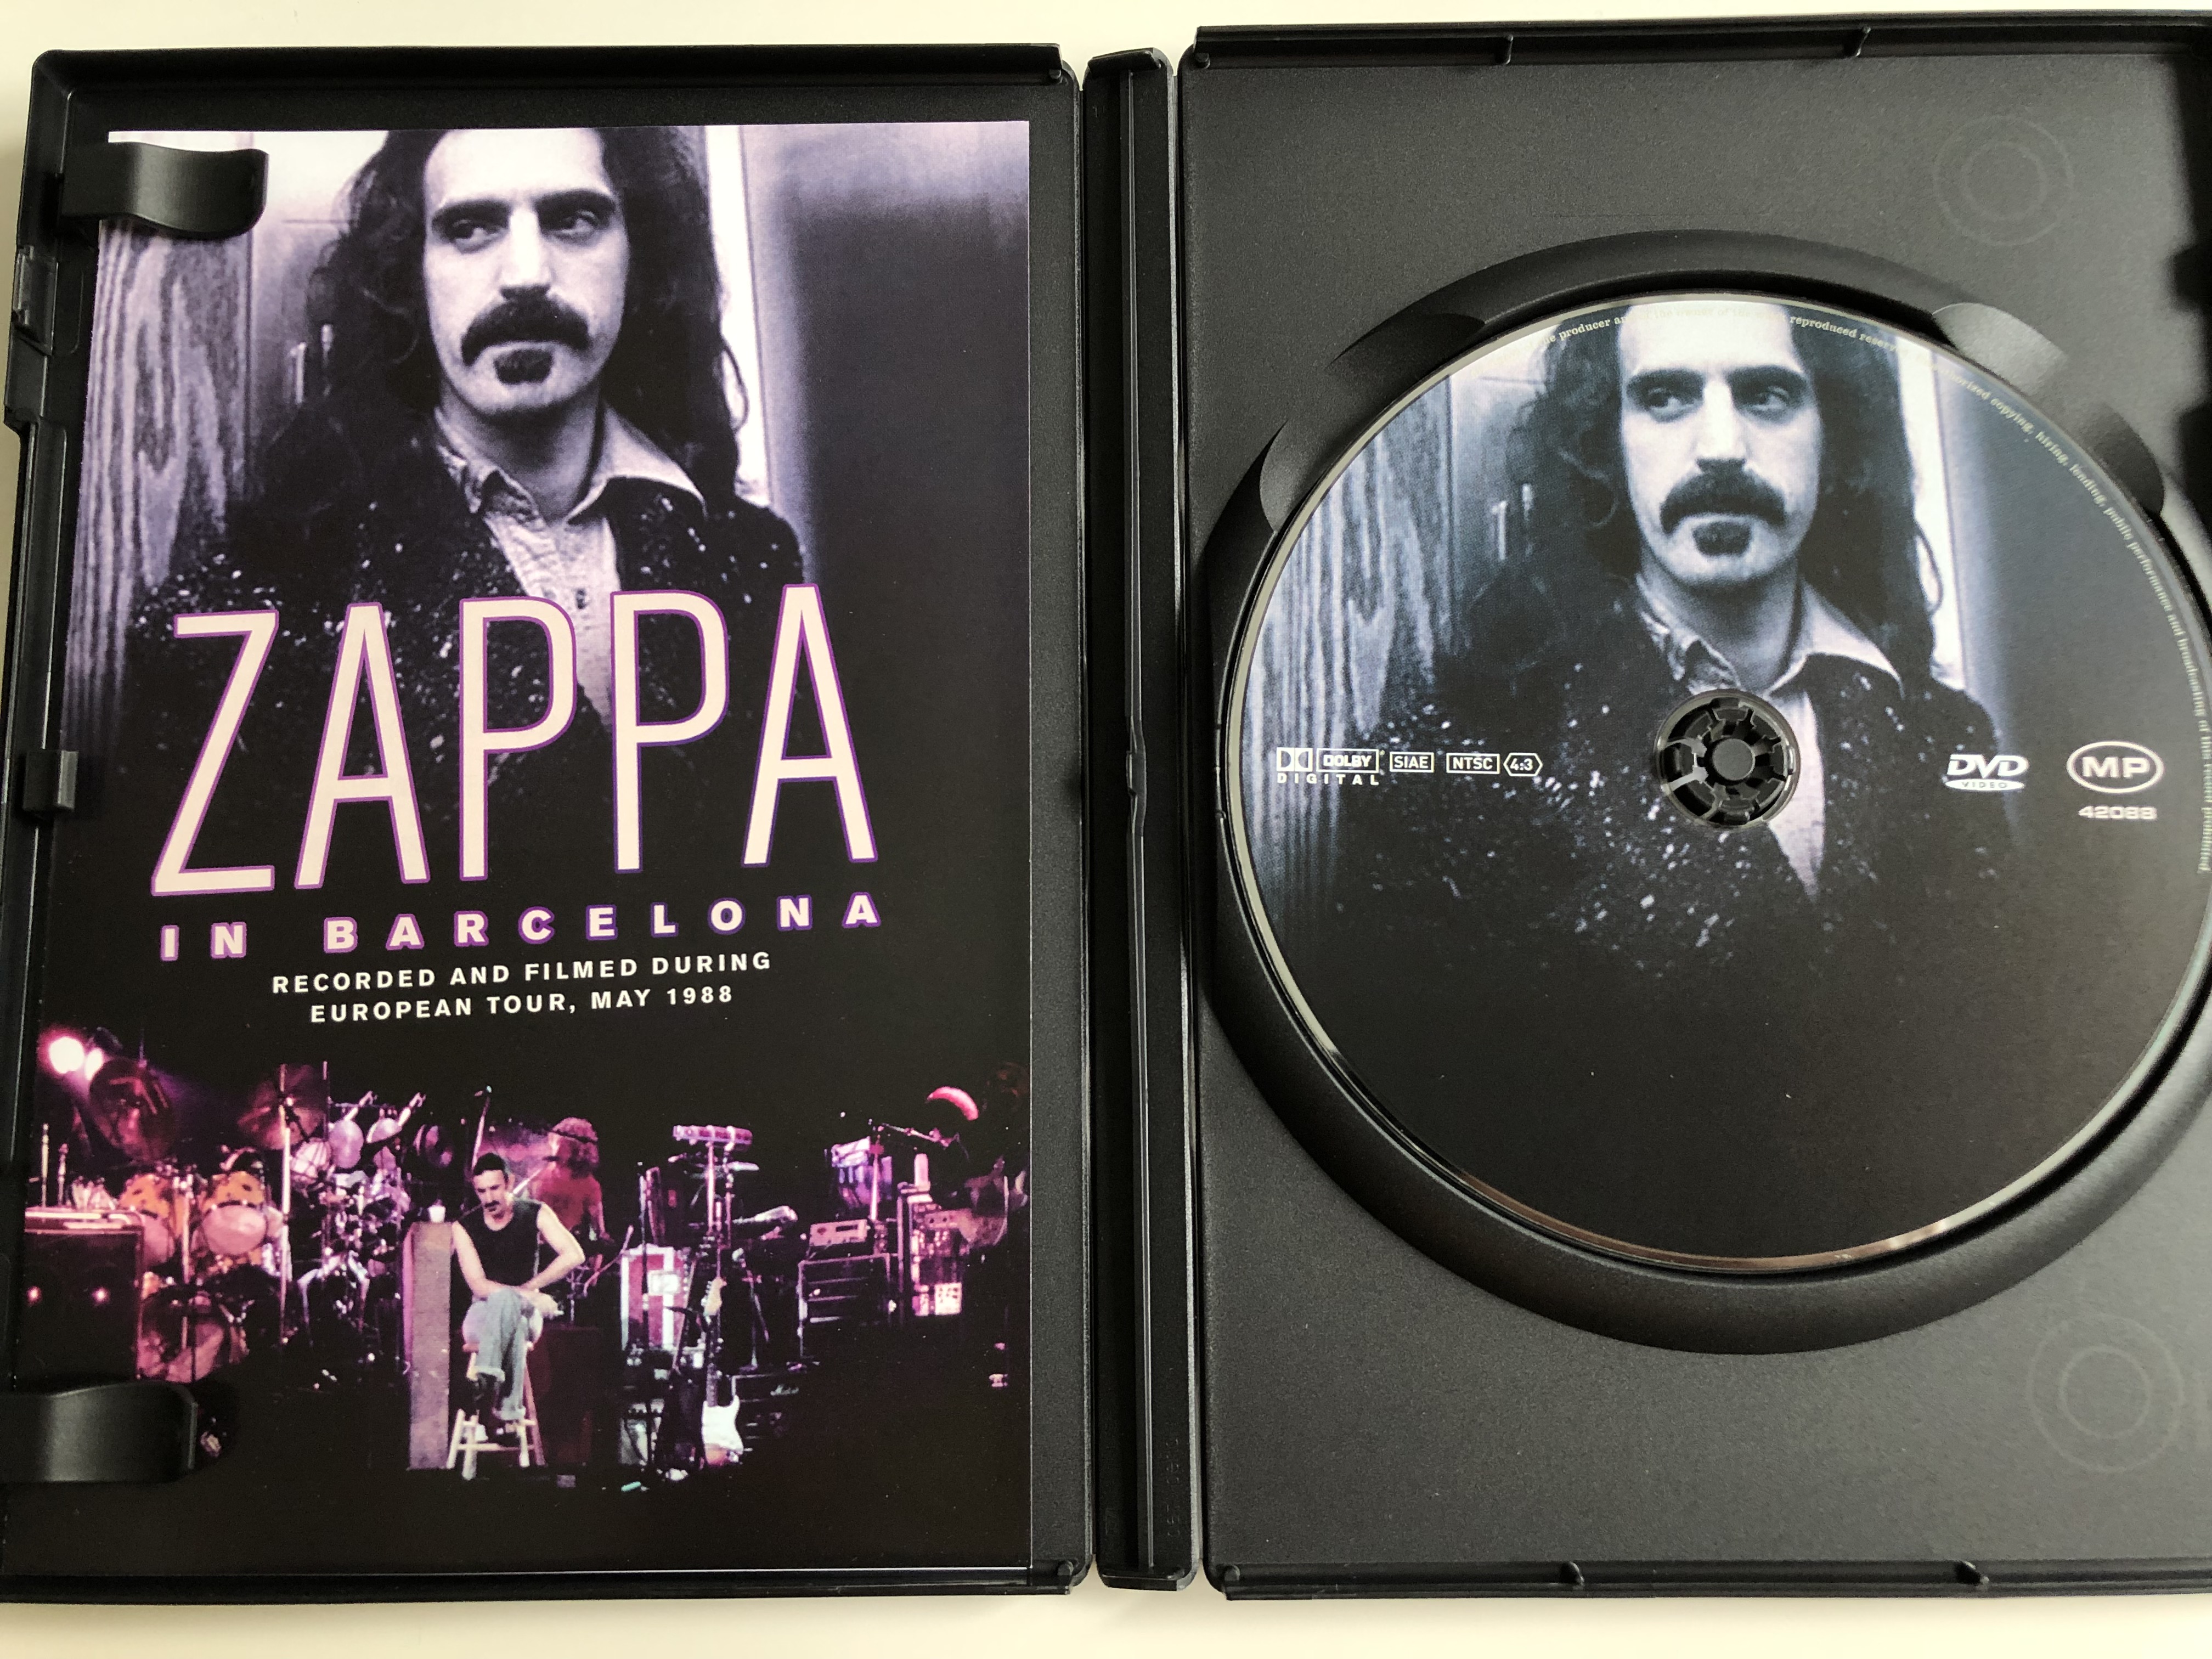 zappa-in-barcelona-dvd-2007-recorded-and-filmed-during-european-tour-may-1988-sharleena-black-napkins-any-kind-of-pain-sofa-love-of-my-life-masterplan-3-.jpg